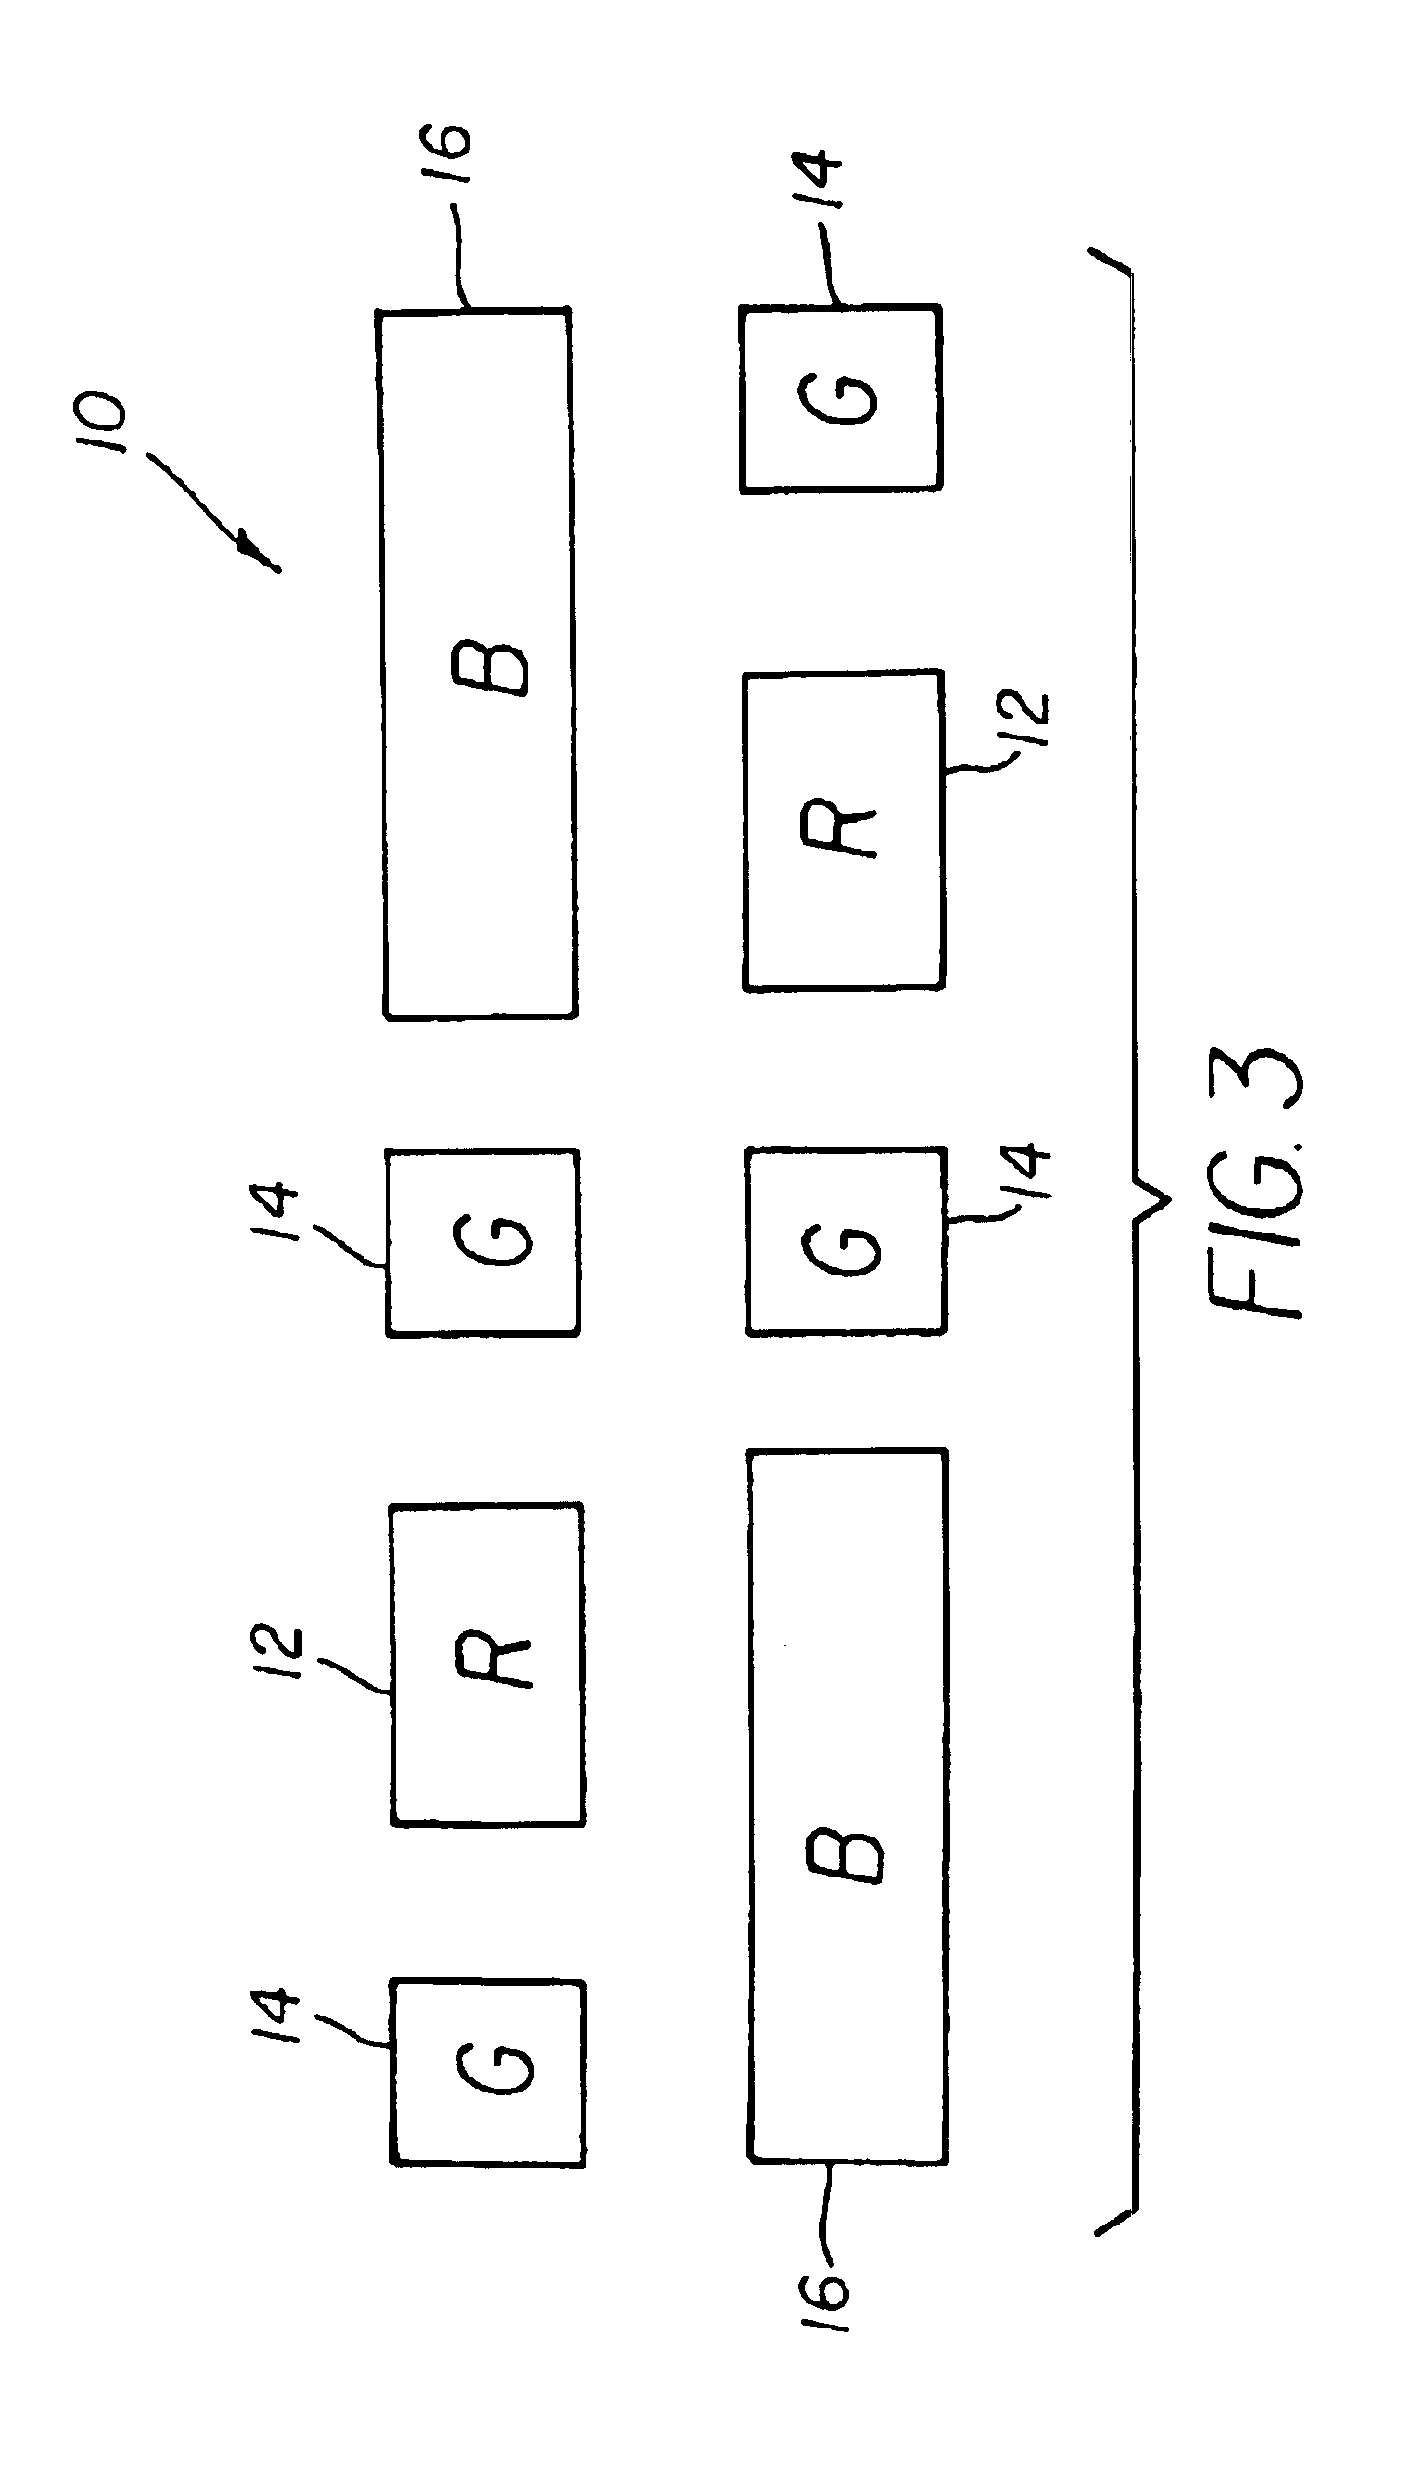 Color OLED display having repeated patterns of colored light emitting elements